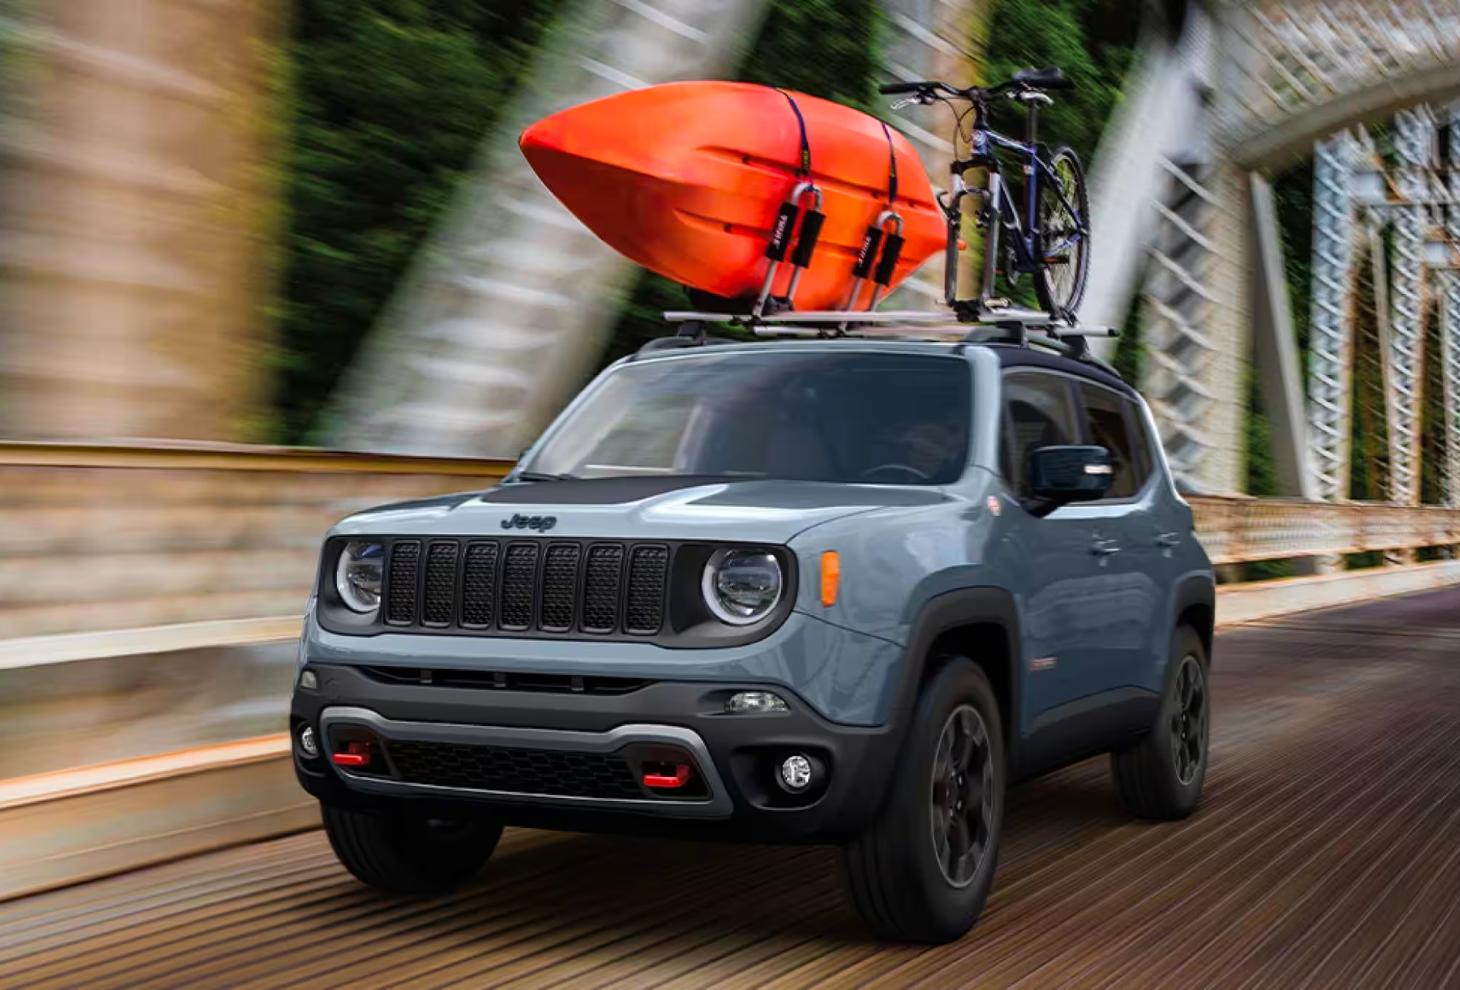 What's New for the 2023 Jeep Renegade?